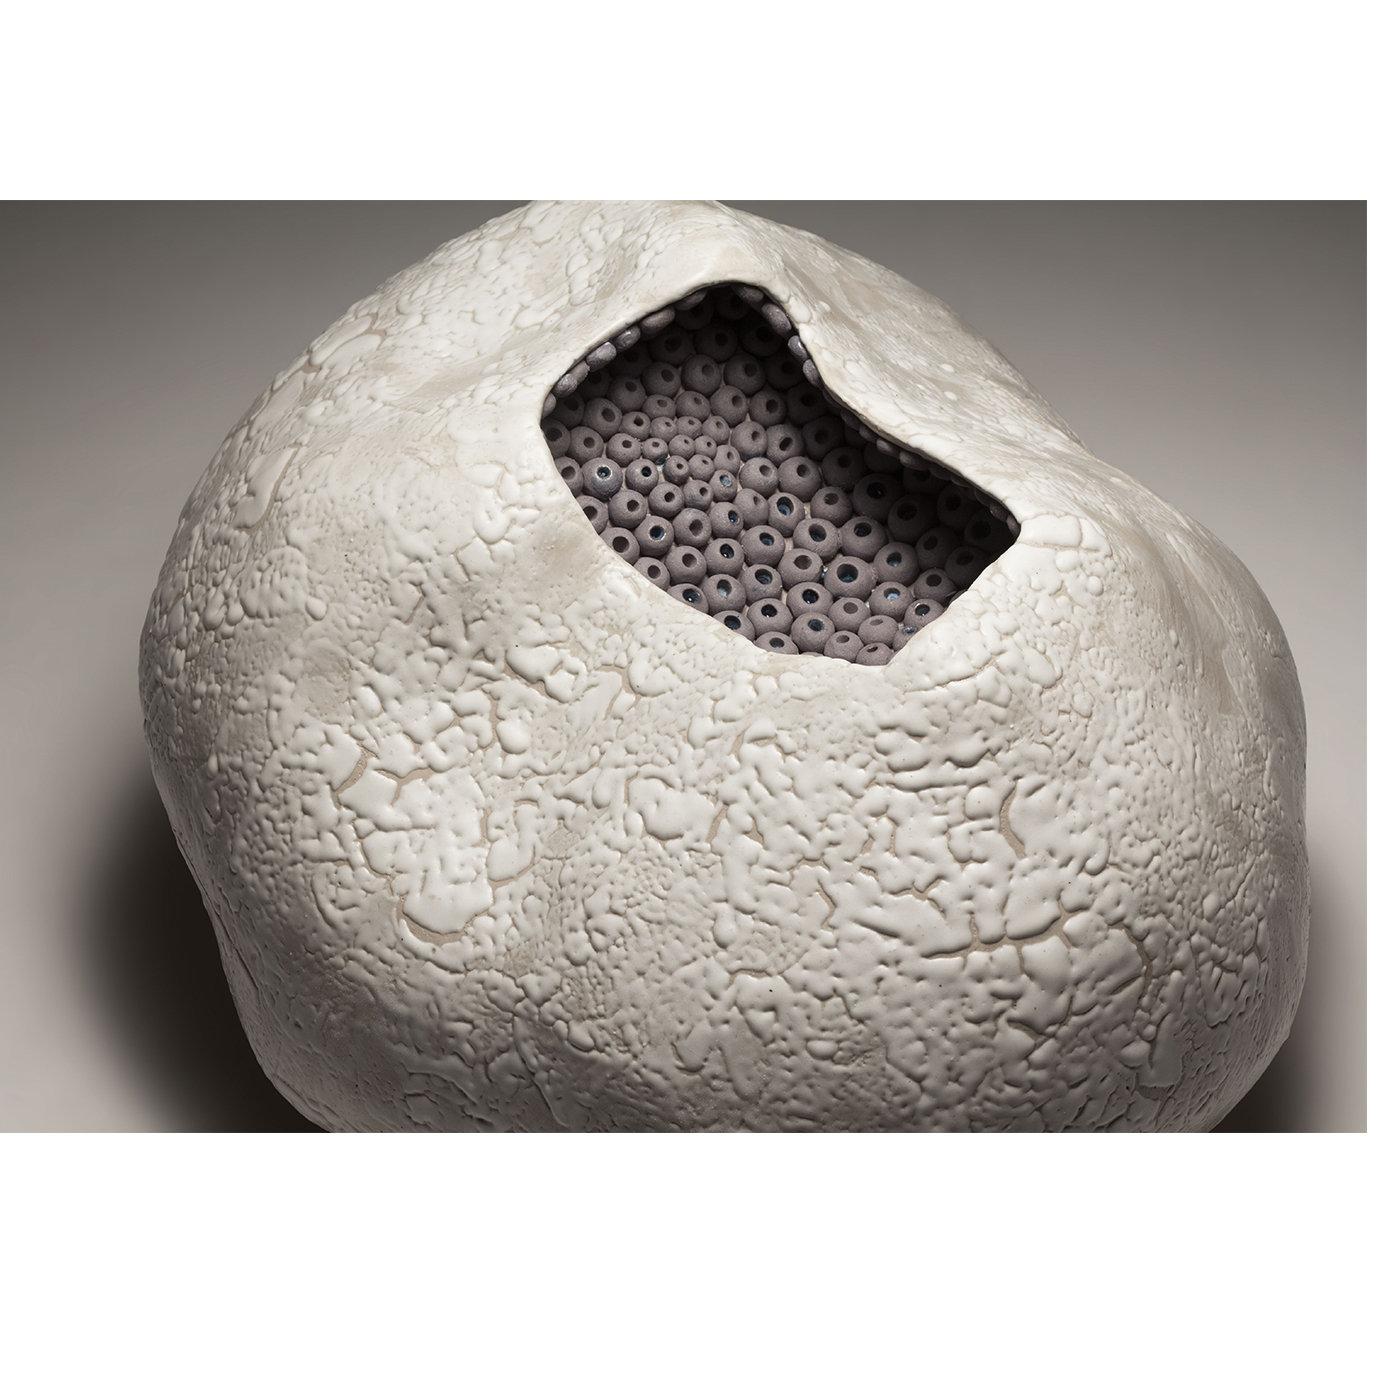 A creative exploration of textures and organic shapes characterizes Angelica Tulimiero’s unmistakable style. This intricate, organically shaped ceramic sculpture is modeled exclusively by hand using the ancient colombino technique (known as cooking)